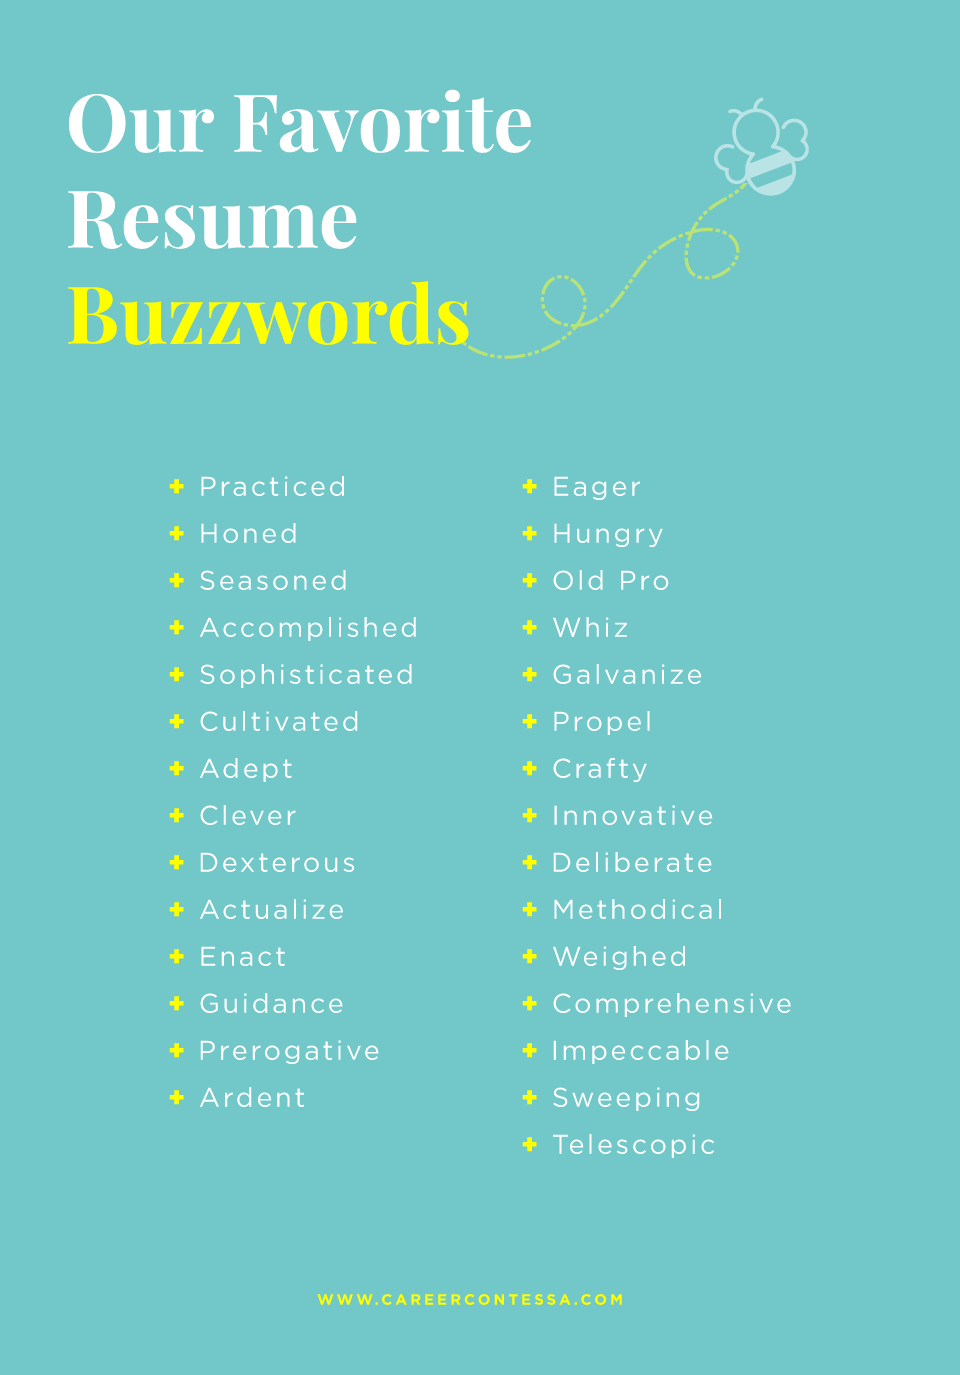 The 10 Most Overused Resume Buzzwords + 130+ Power Words to Use Instead